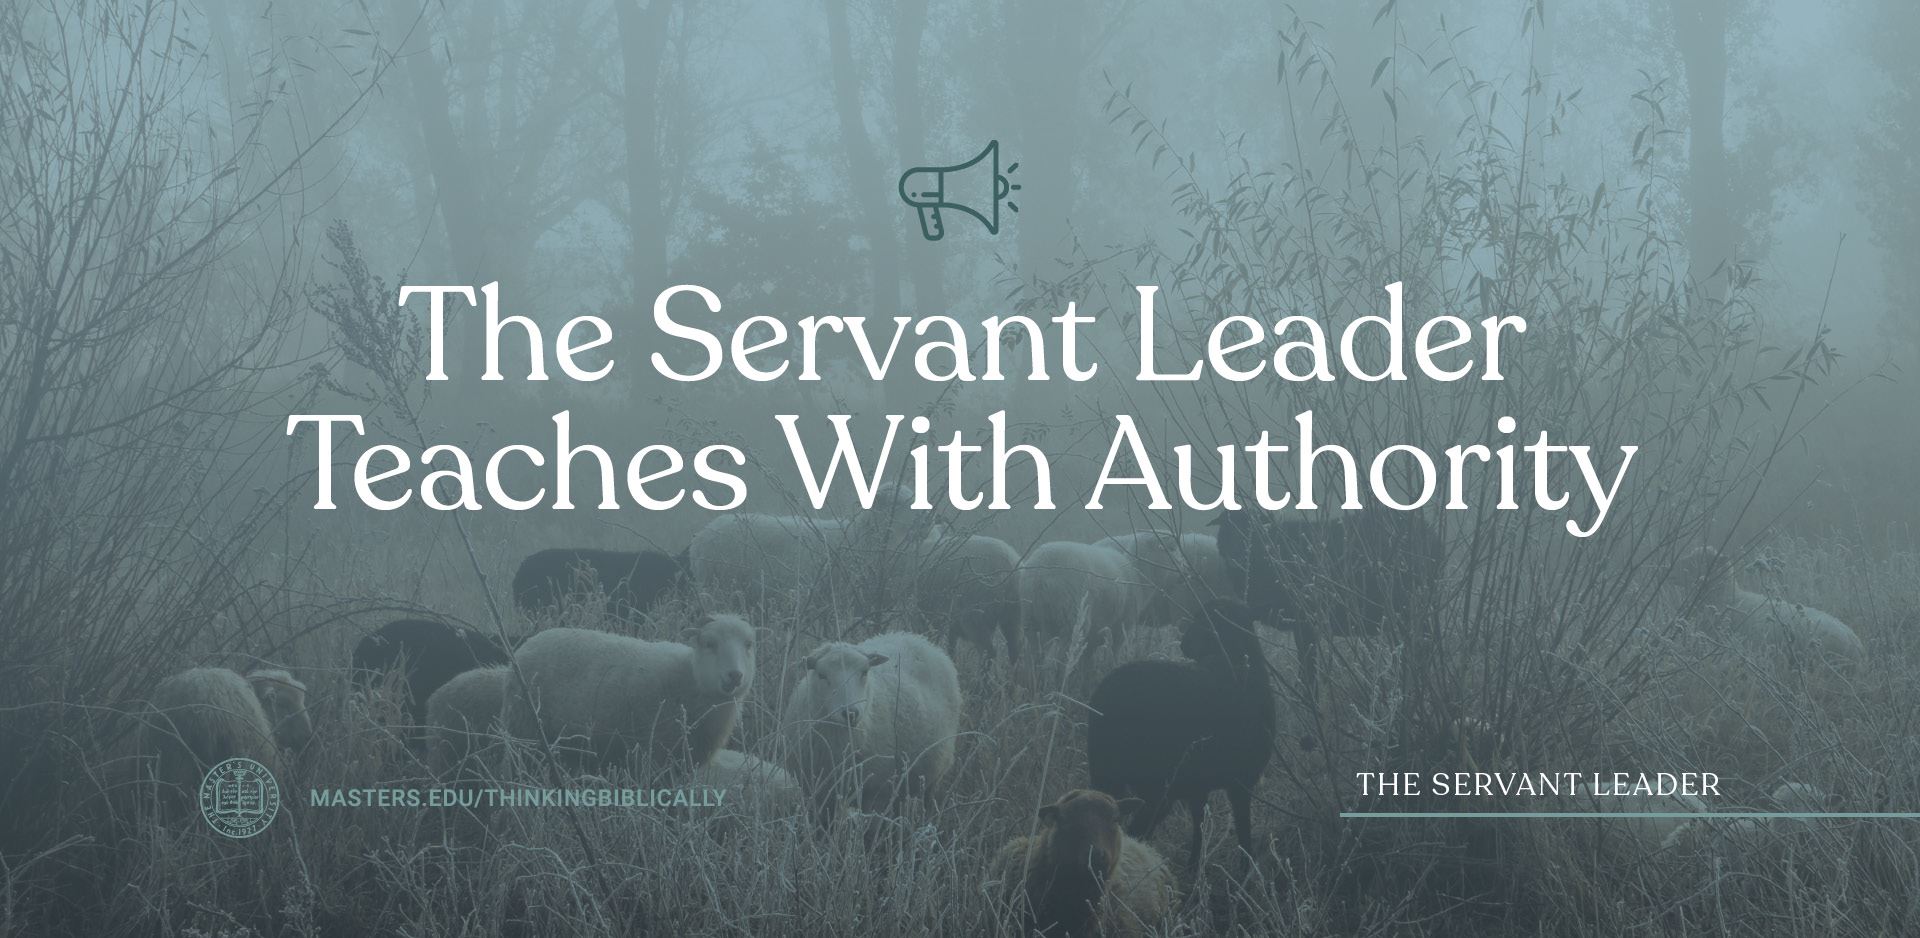 The Servant Leader Teaches With Authority Featured Image